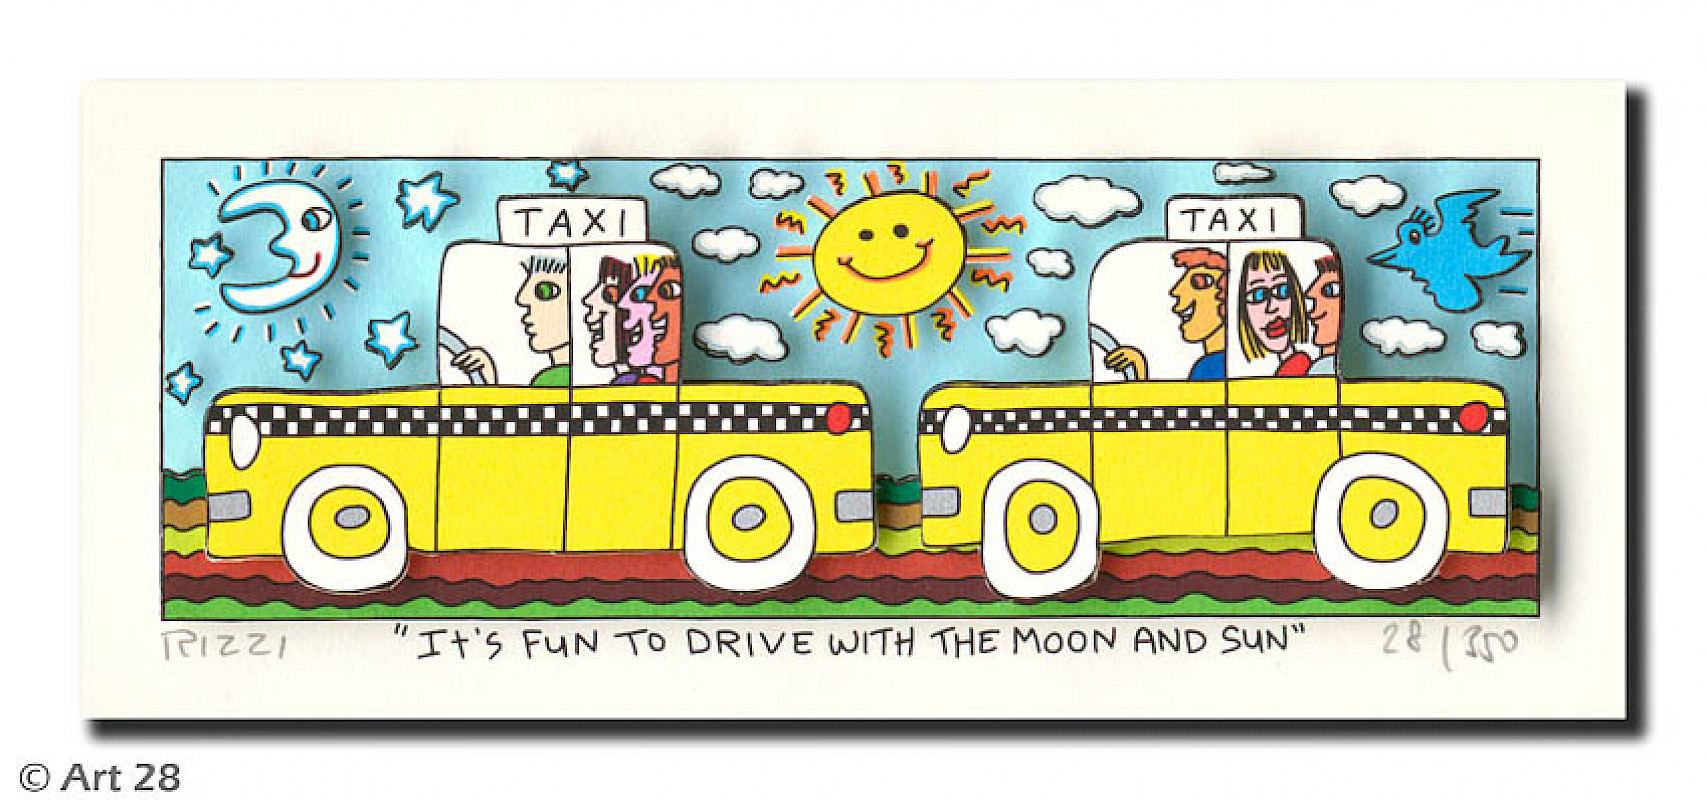 IT'S FUN TO DRIVE WITH THE MOON AND SUN